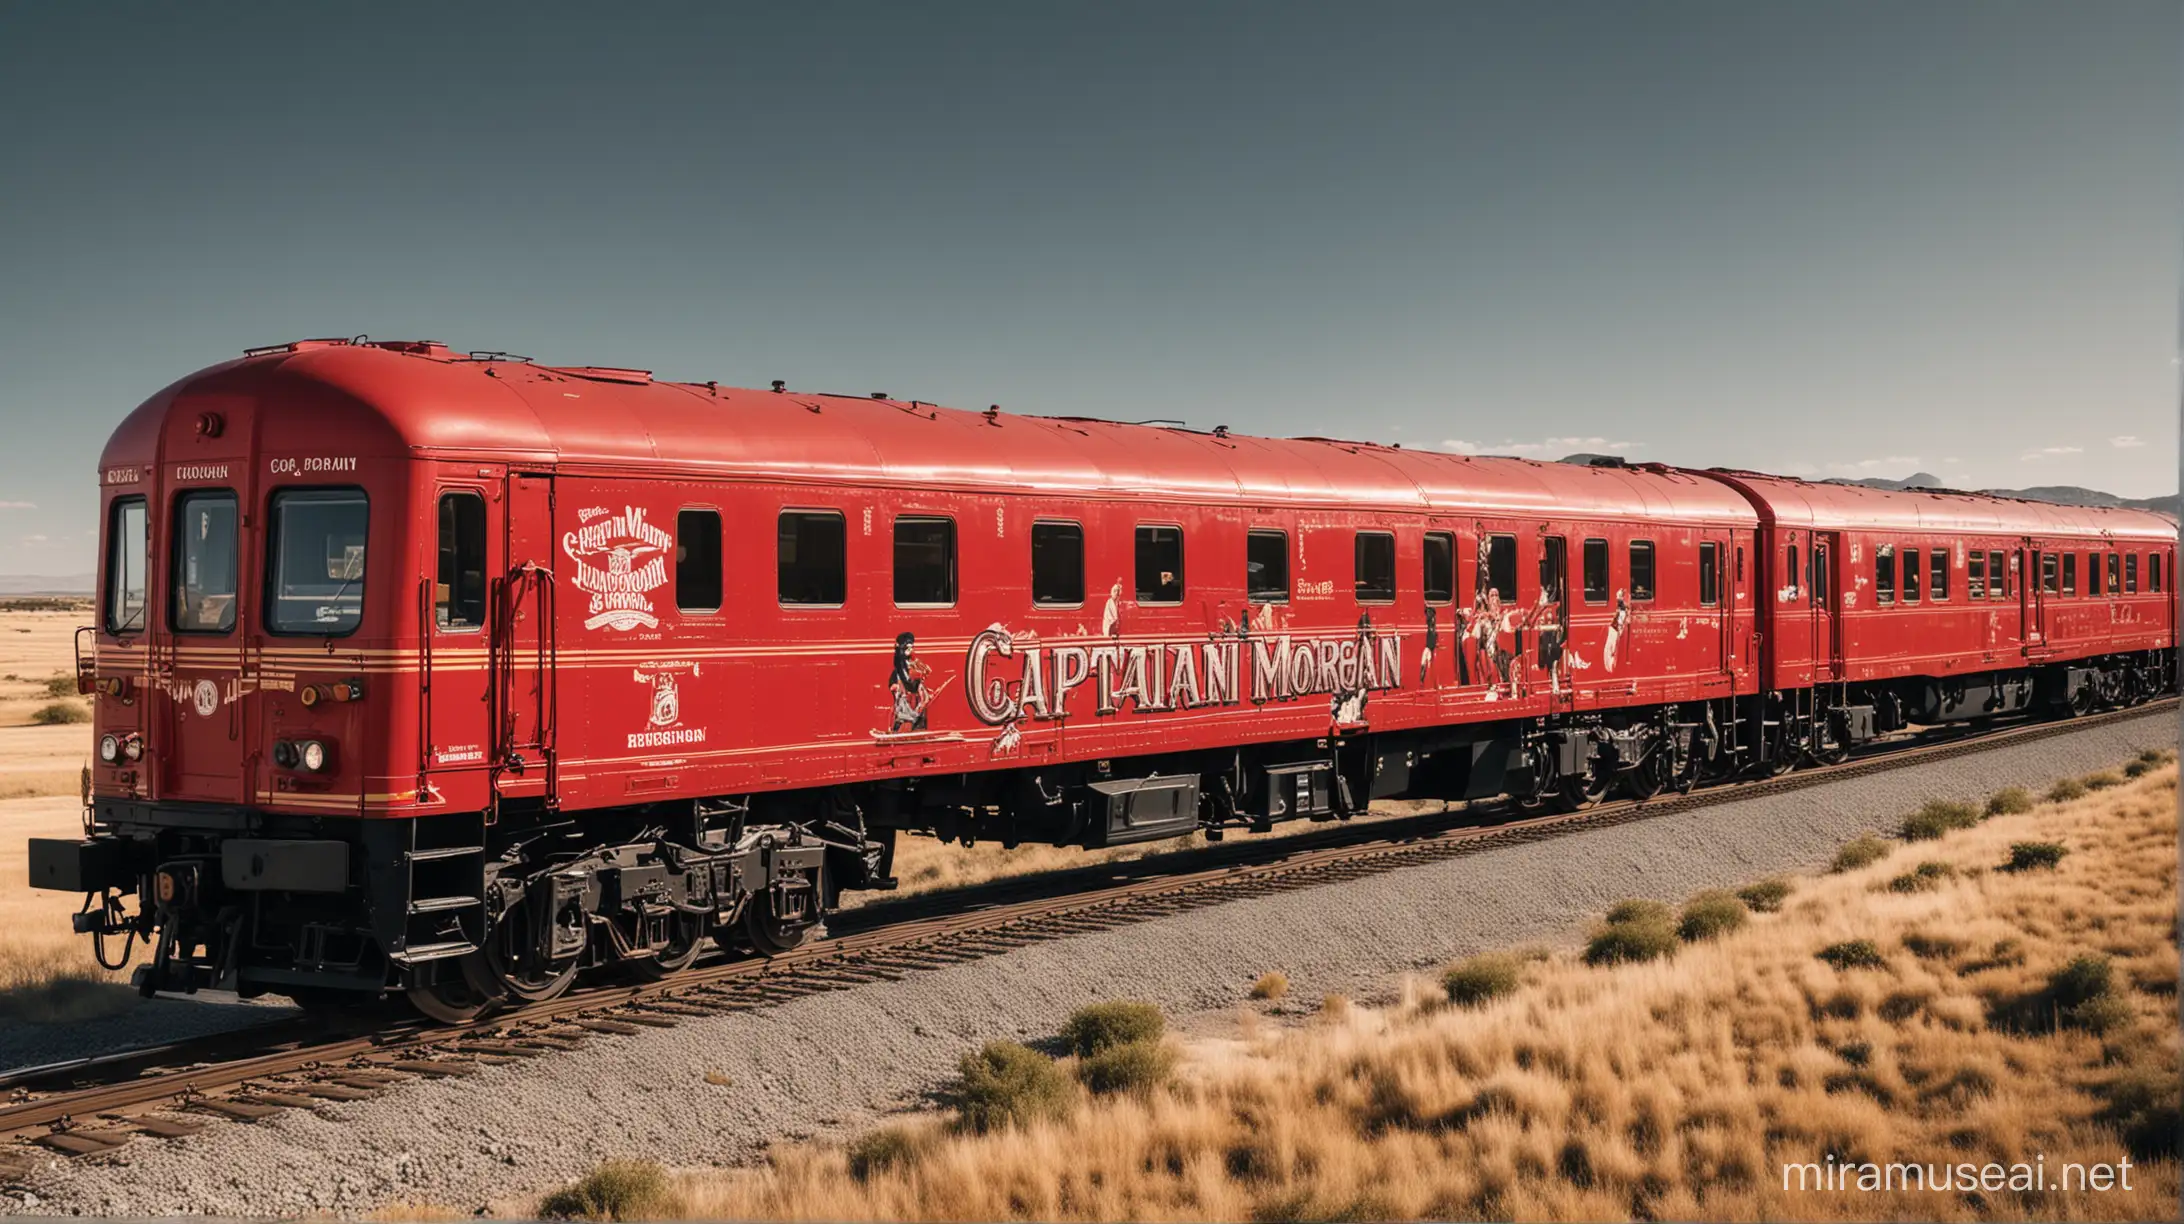 show me a Captain Morgan branded red train with people inside dressed like Y2K heading into the horizon